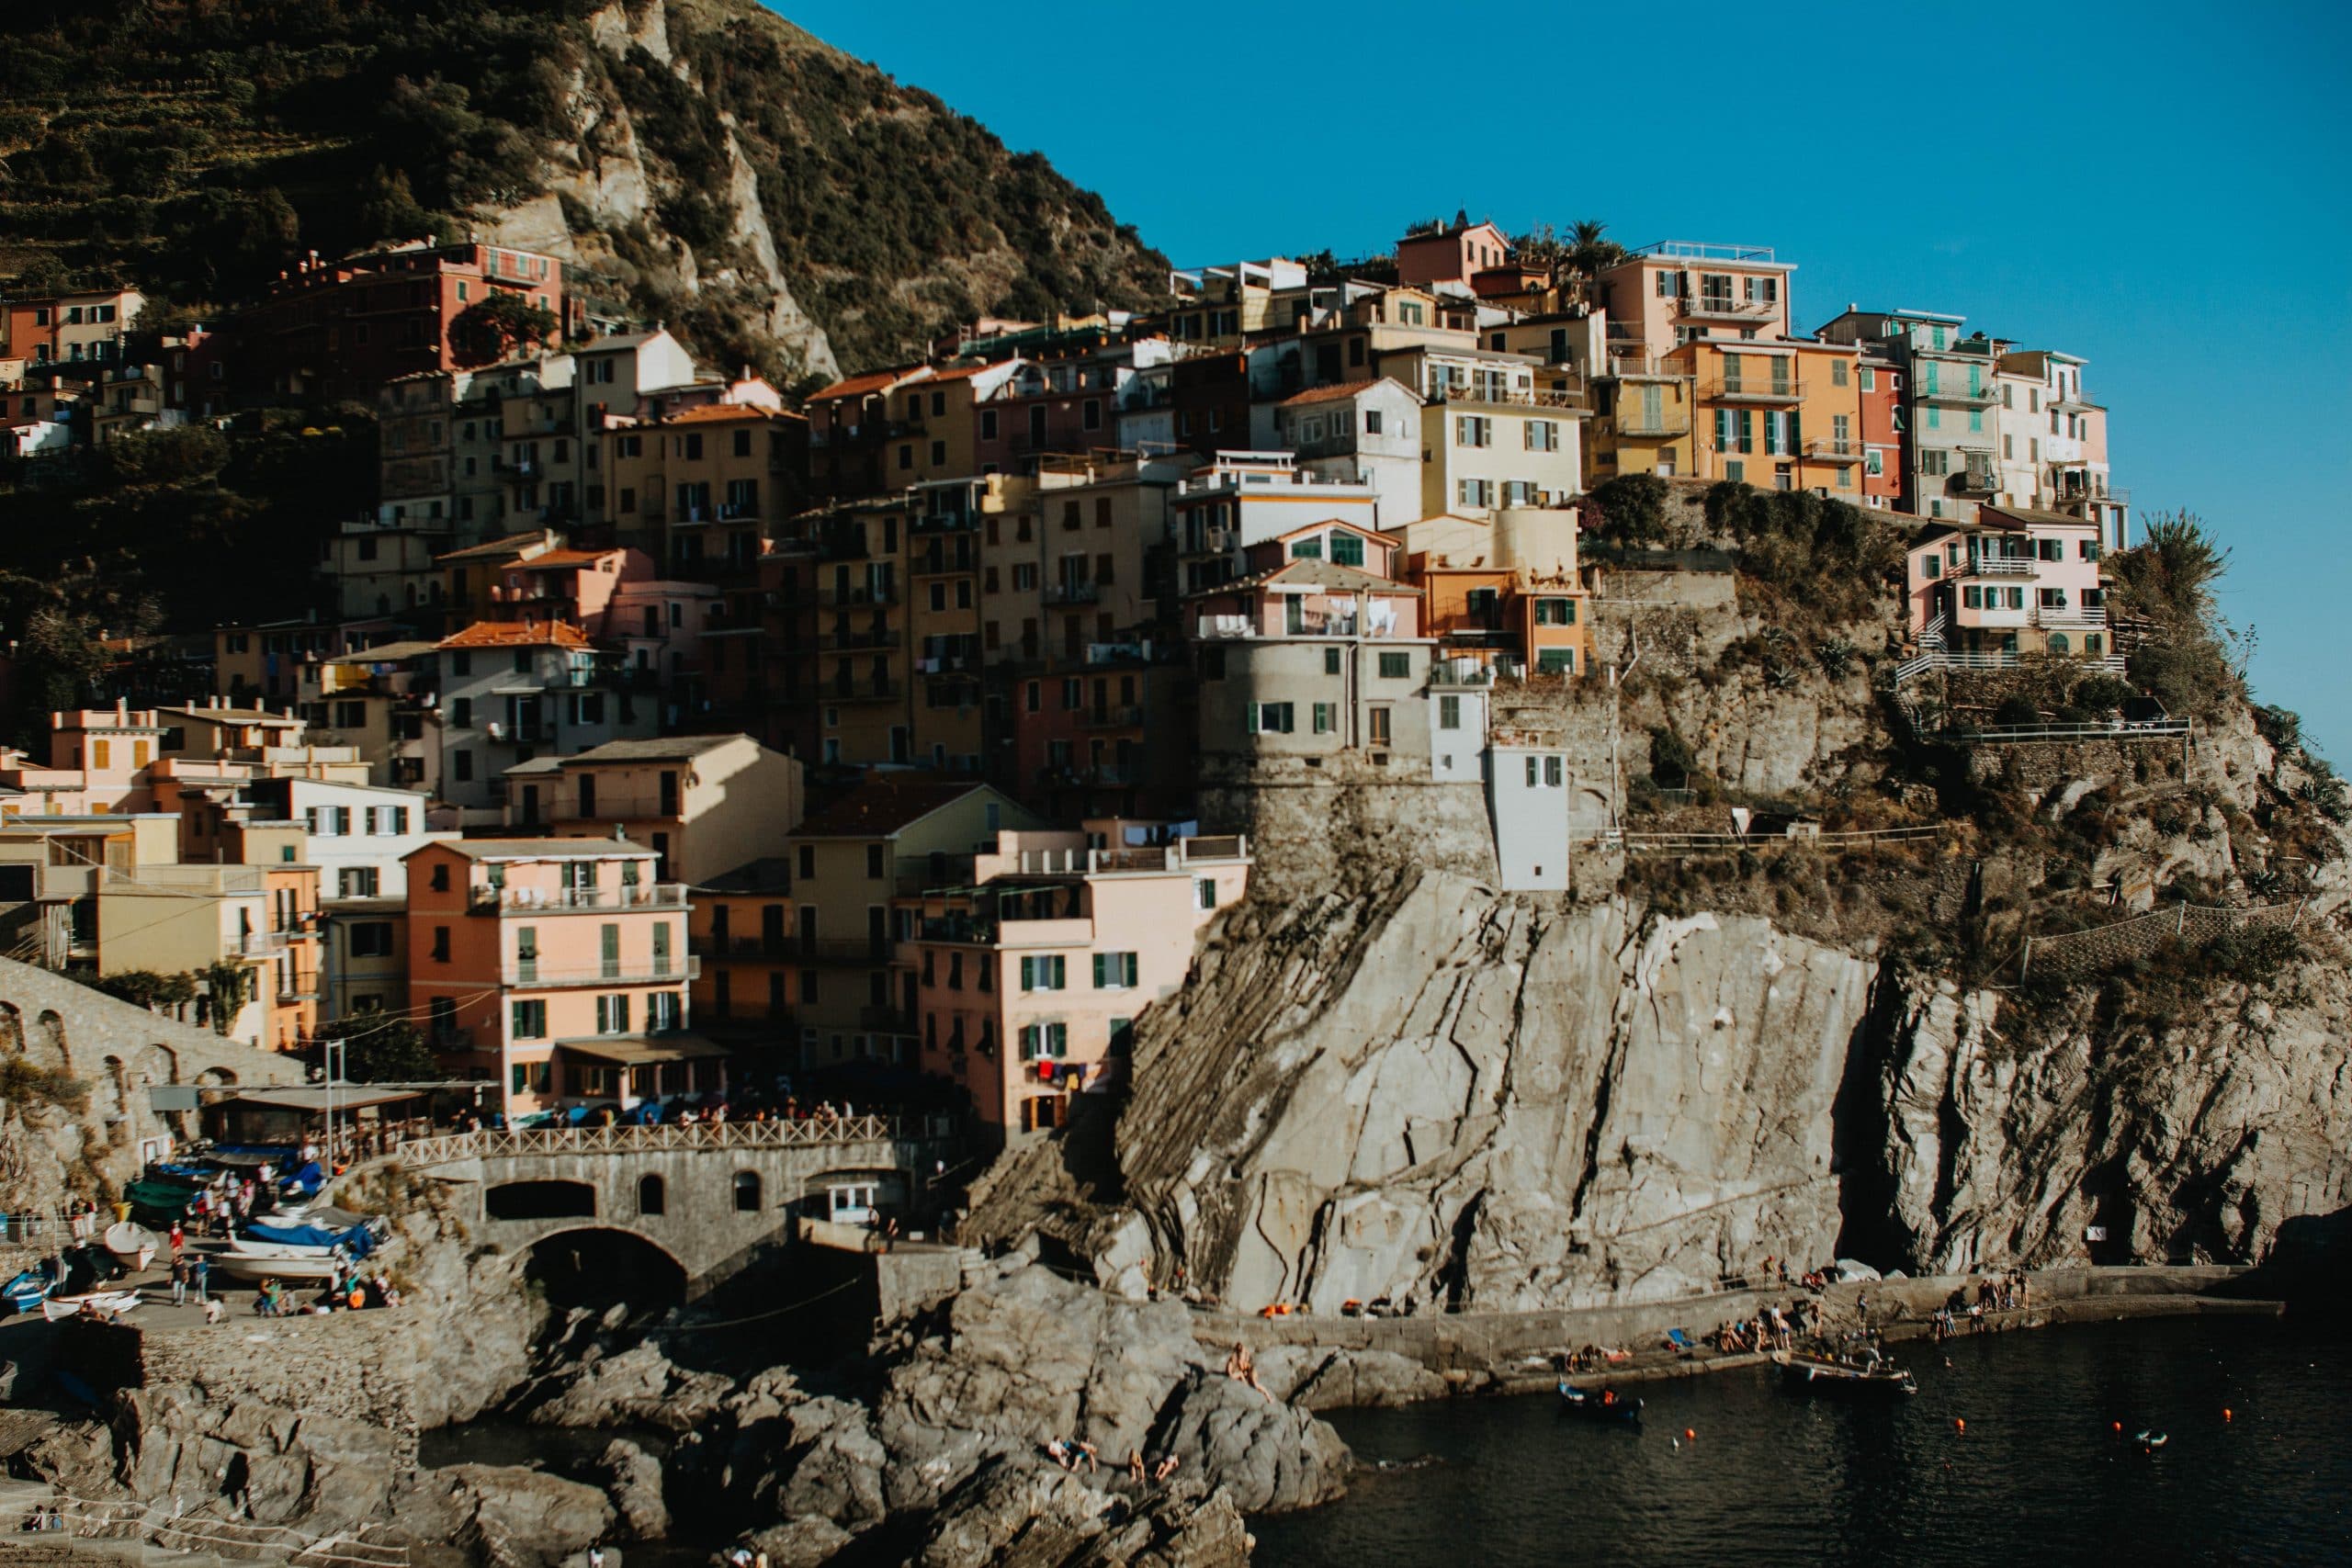 Manarola is the most postcard-worthy (but also most touristic) village